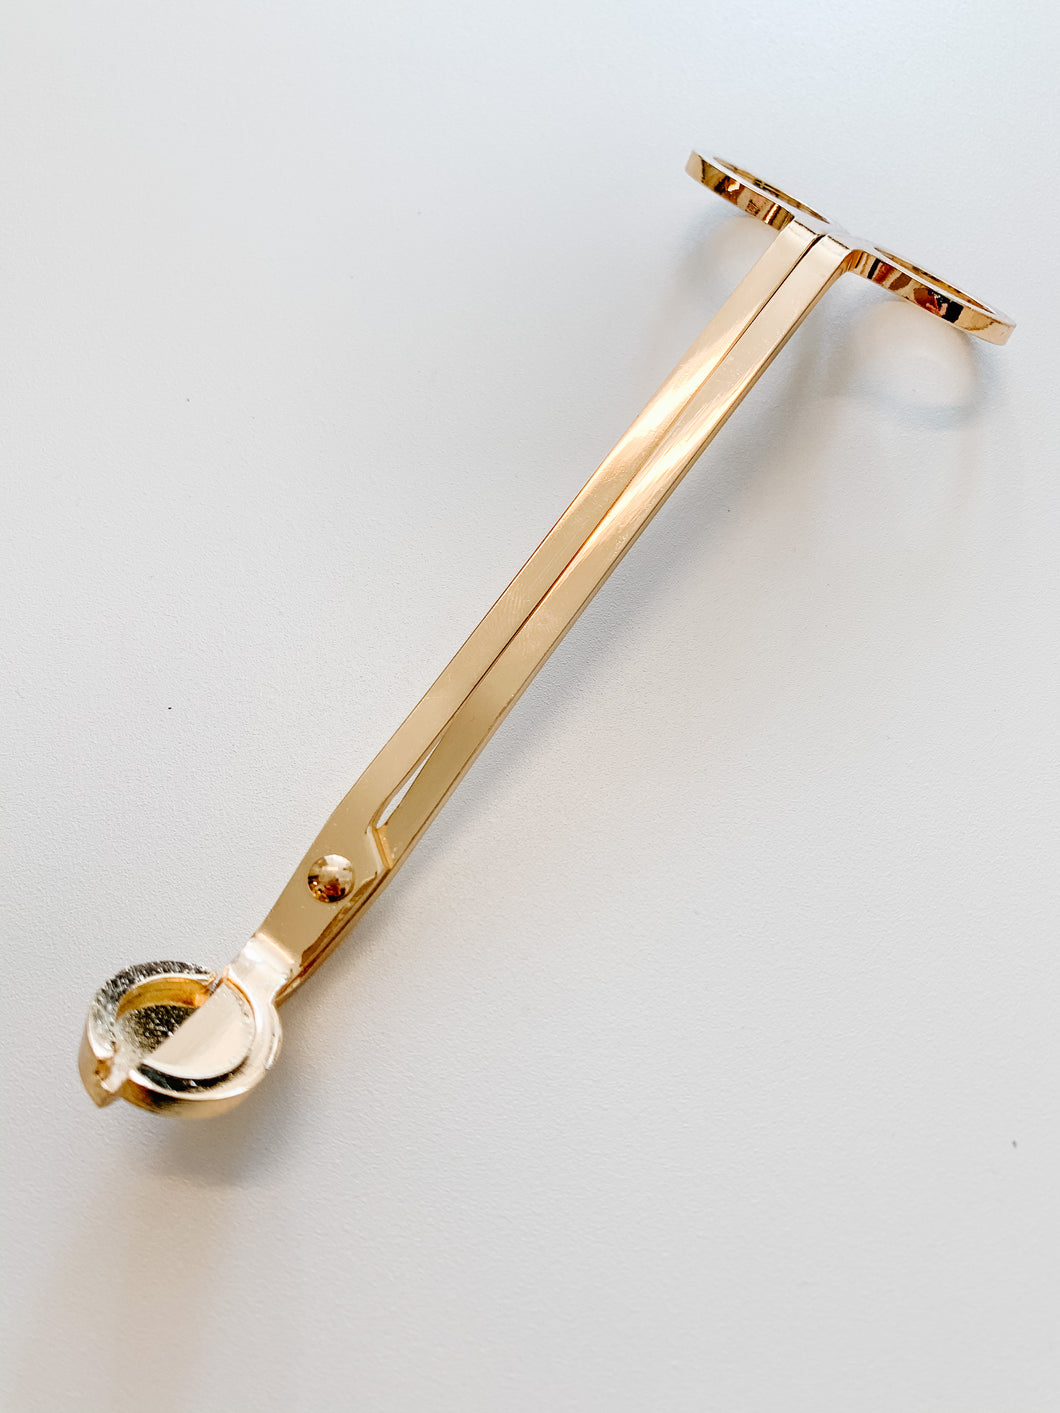 Gold Wick Trimmer